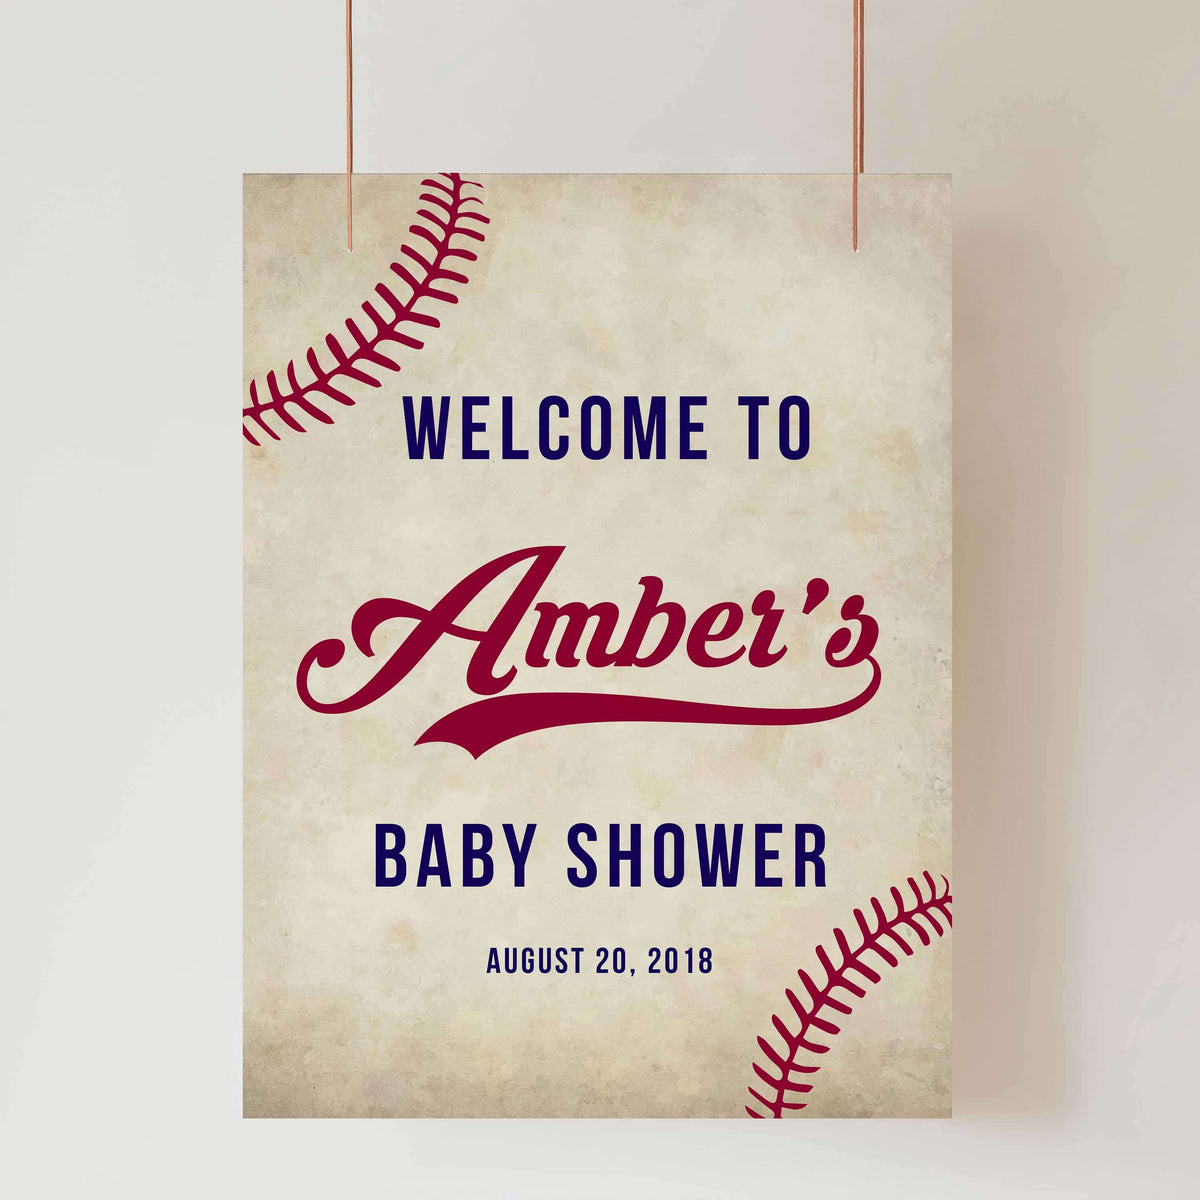 baseball baby welcome sign, printable baby shower welcome signs, little slugger baby decor, fun baby shower games, baseball baby decor